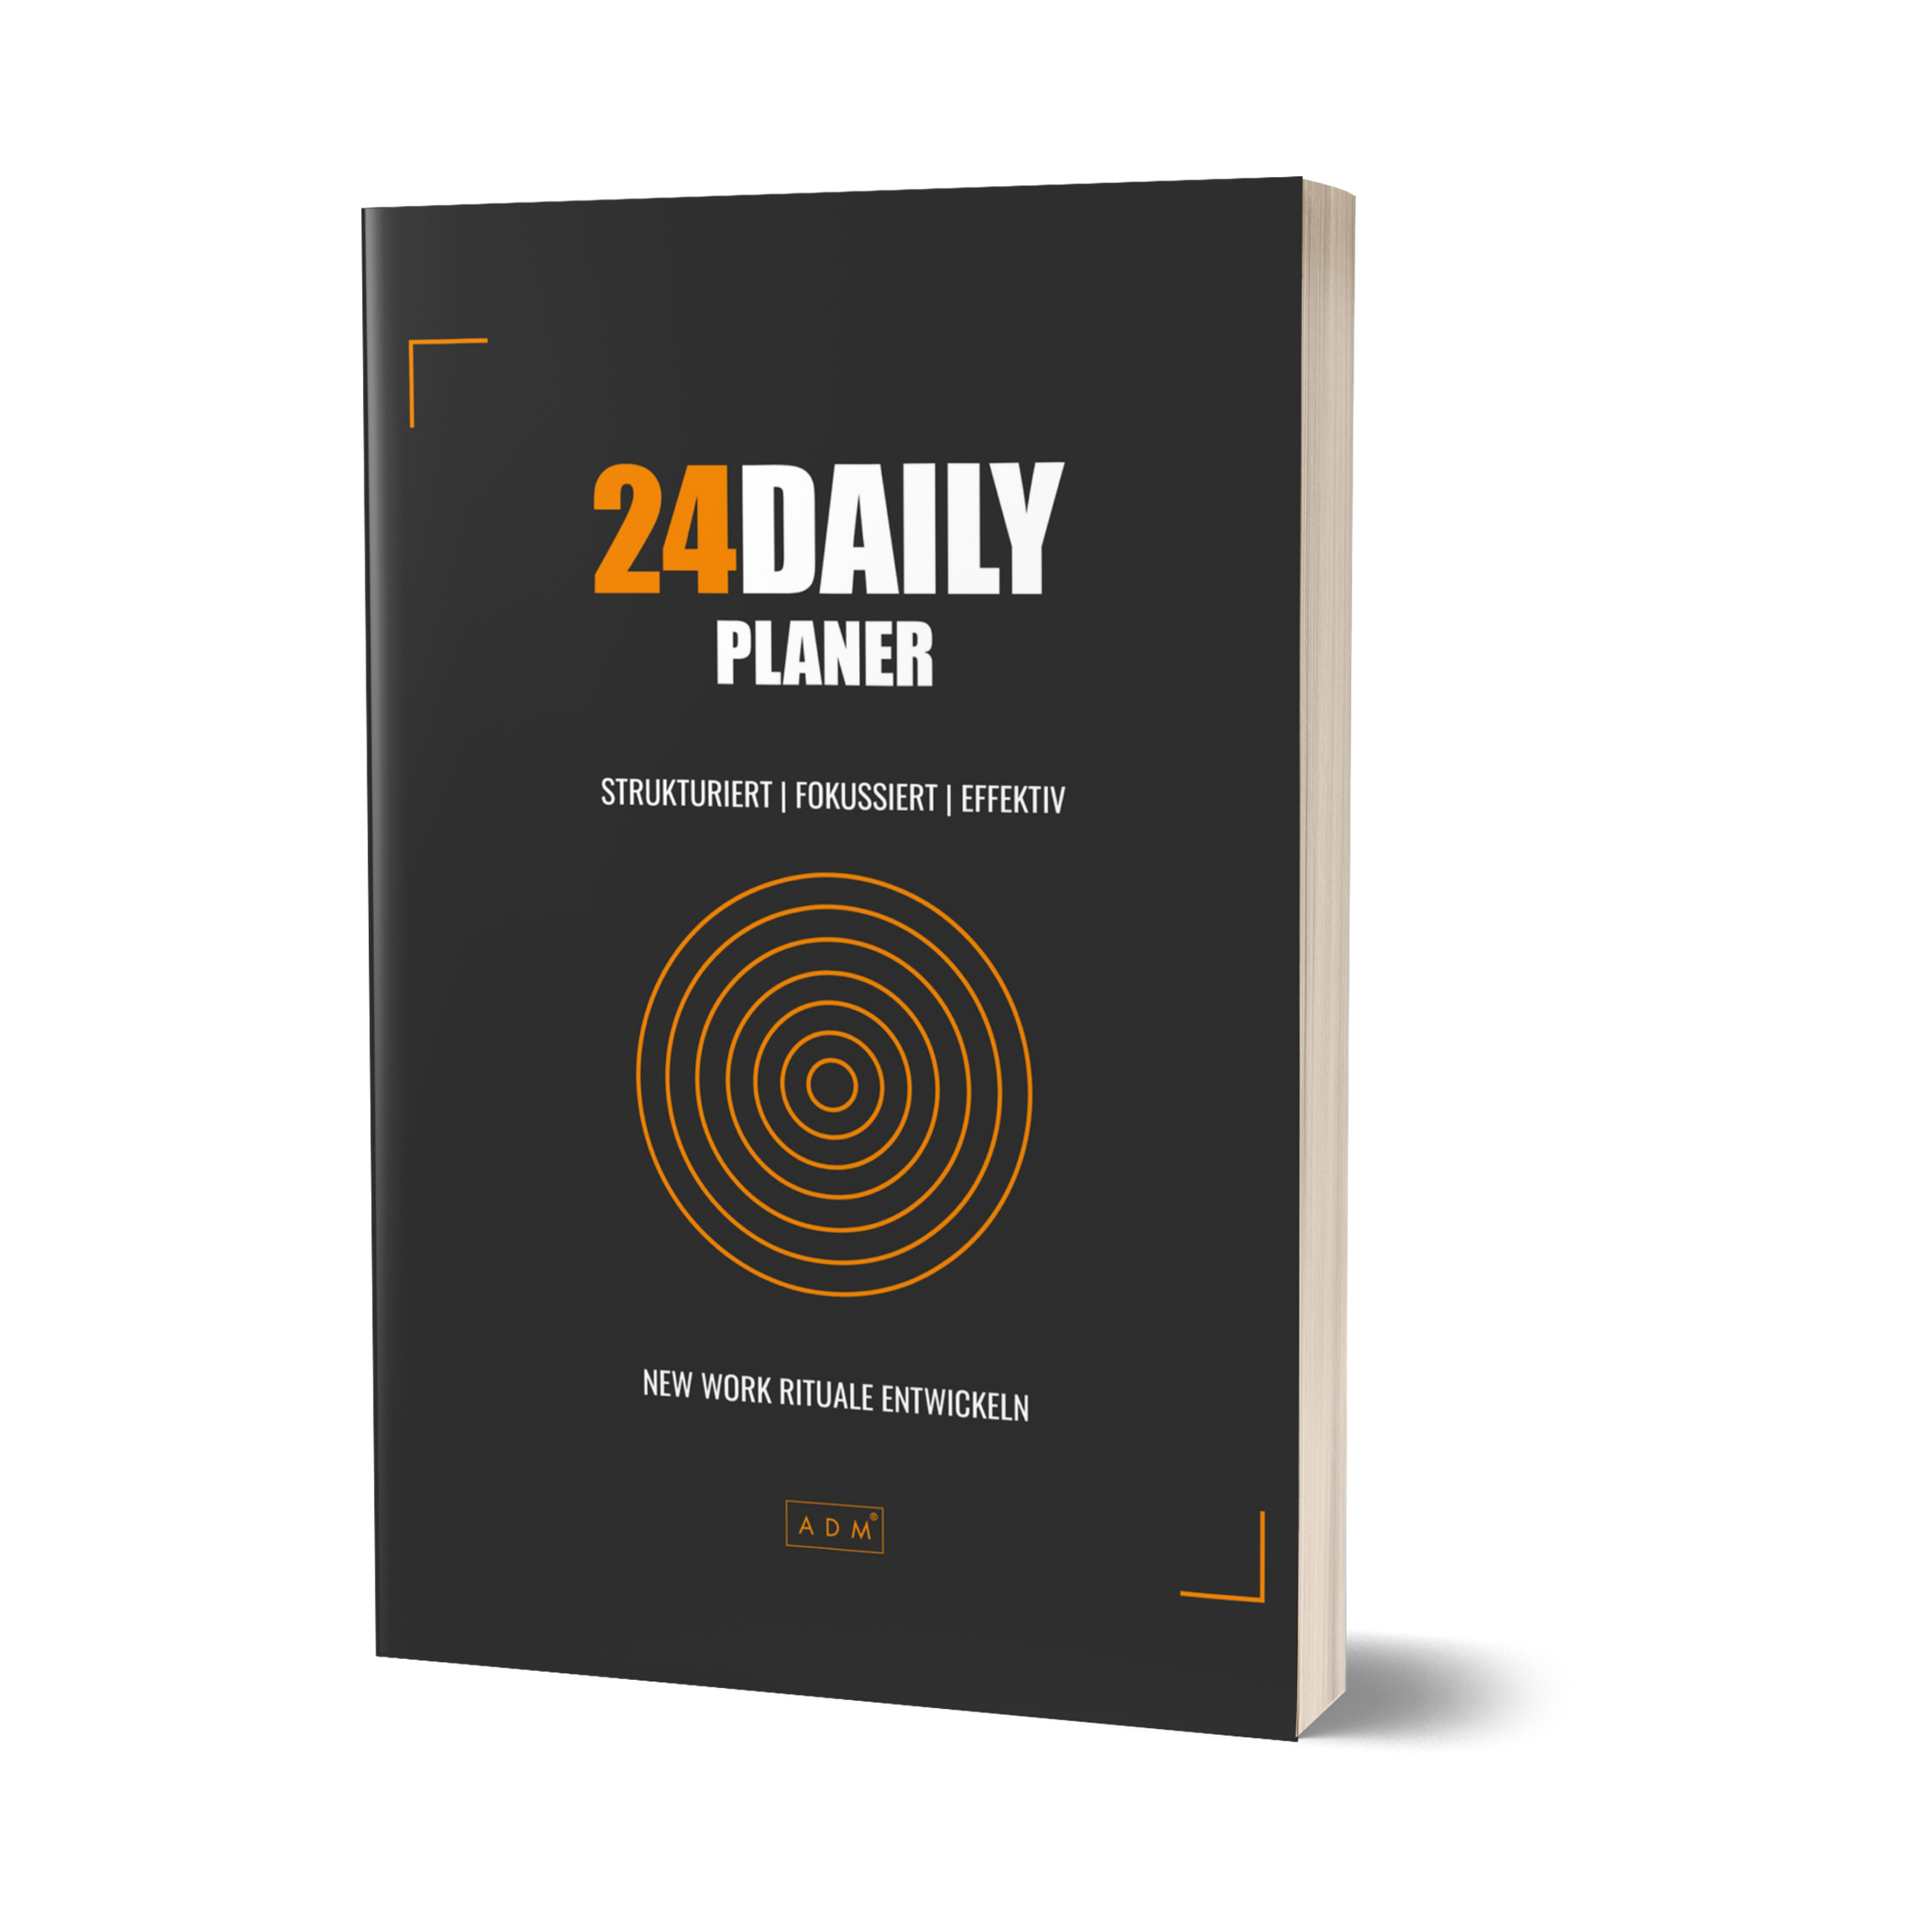 24DAILY PLANER - New Work Rituale entwickeln